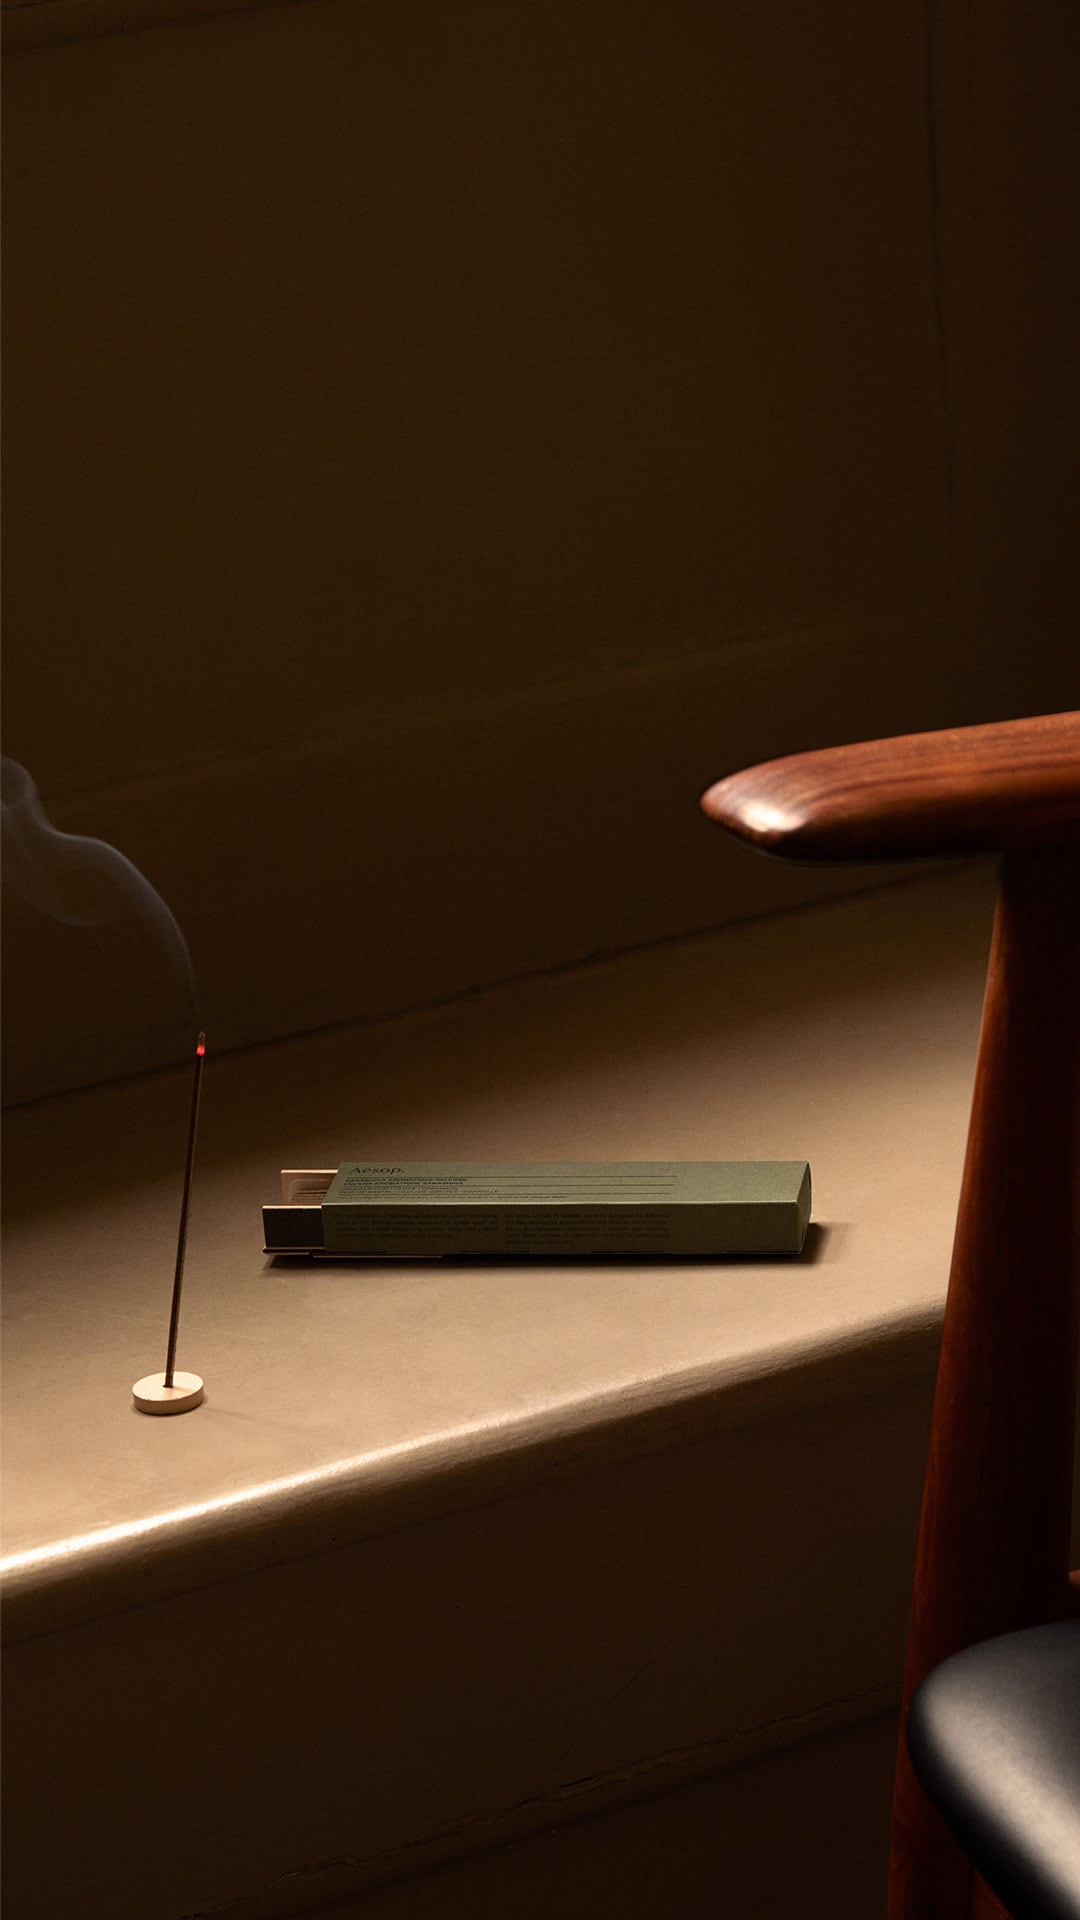 A lit stick of incense sitting alongside a mid-century chair.